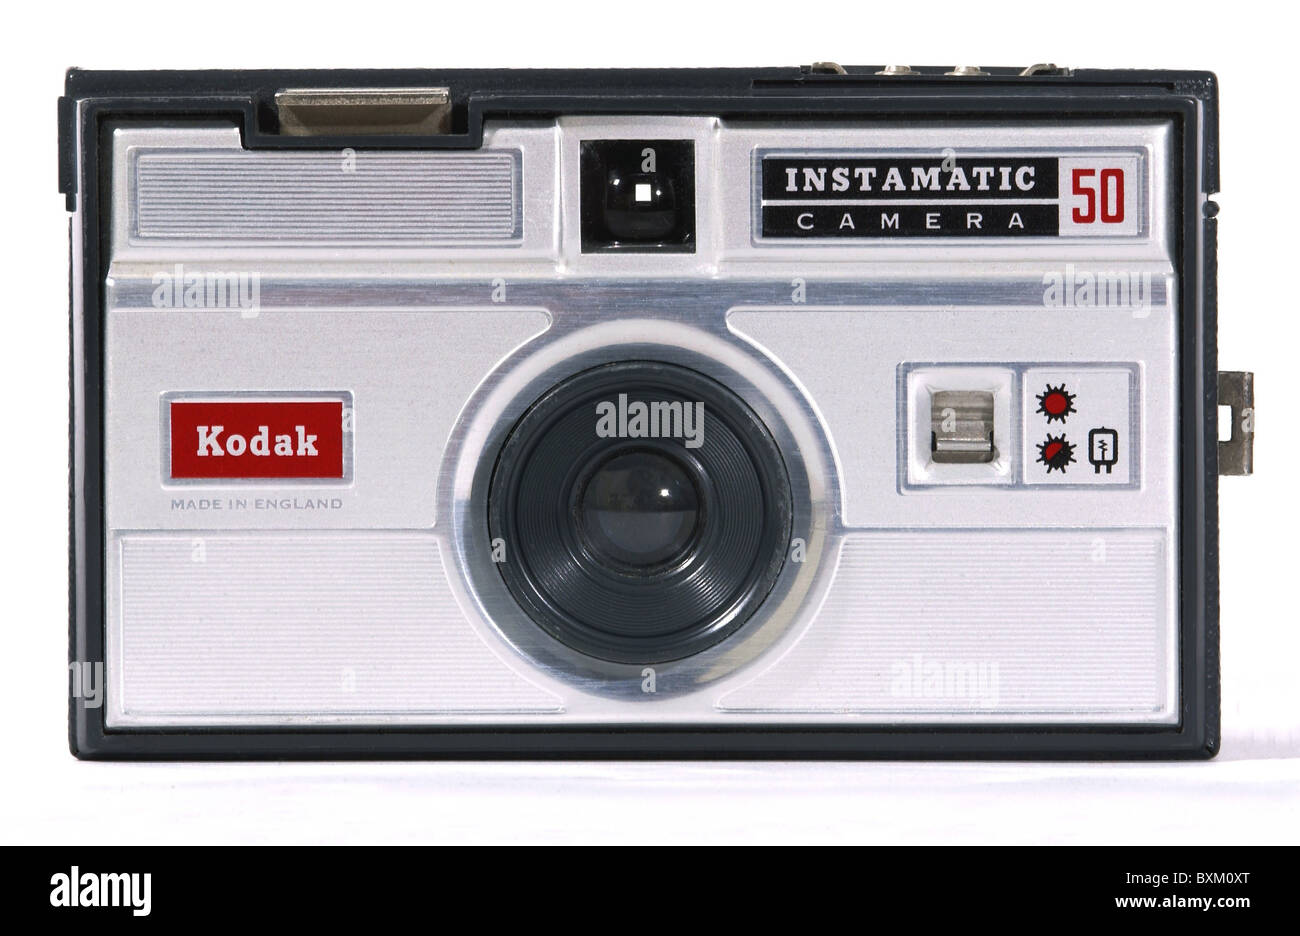 photography, cameras, Kodak Instamatic 50, produced from 1963 until 1966, Made in England, 1960s, 60s, 20th century, historic, historical, camera, cam, cameras, lens, objective, lenses, objectives aperture 11, 43 mm, focal length, shutter time: 1/40 and 1/90 for sun and clouds, 28 x 28 mm negative, 35mm film camera, cameras, aluminum, aluminium chassis, case, clipping, cut out, cut-out, cut-outs, Additional-Rights-Clearences-Not Available Stock Photo